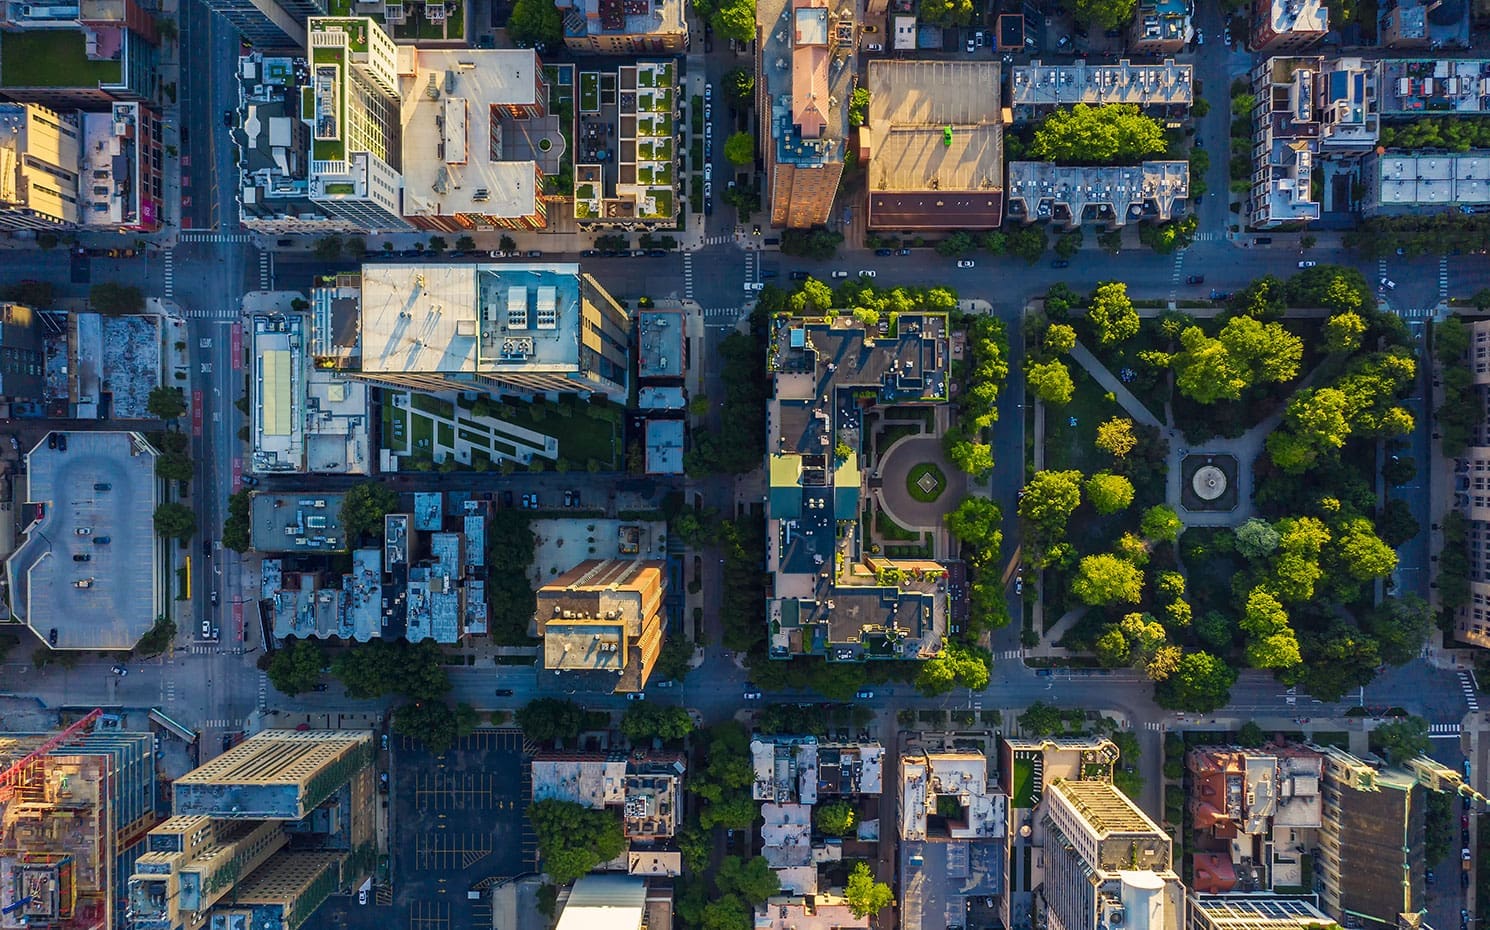 Bird's-eye view of cityscape. Buildings, busy streets, trees, and a park.